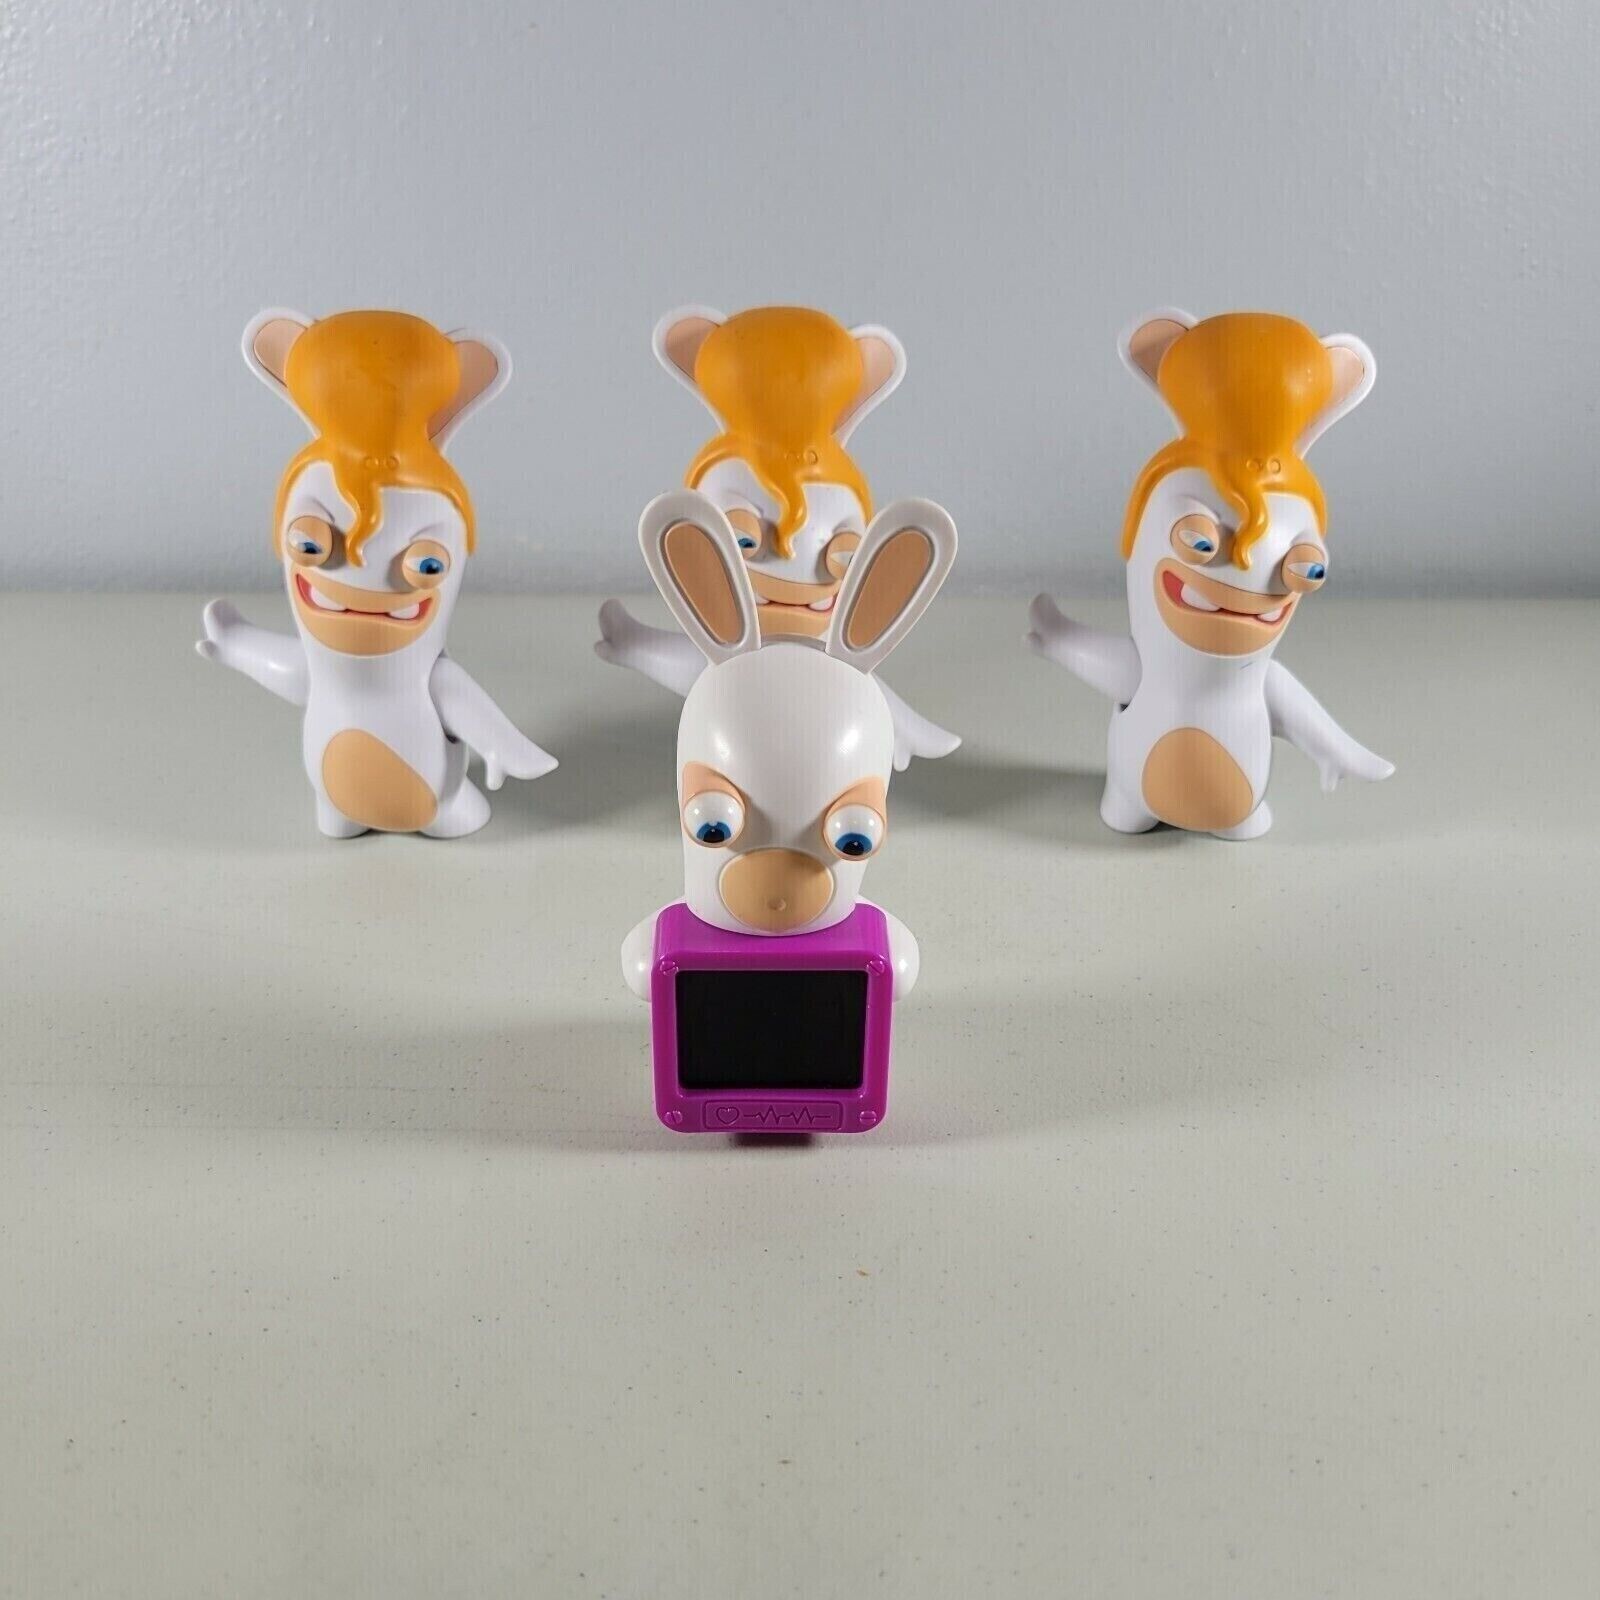 Rabbids Toy Figures Lot of 4 Rabbits Invasion 2019 Burger King As Shown - $10.99